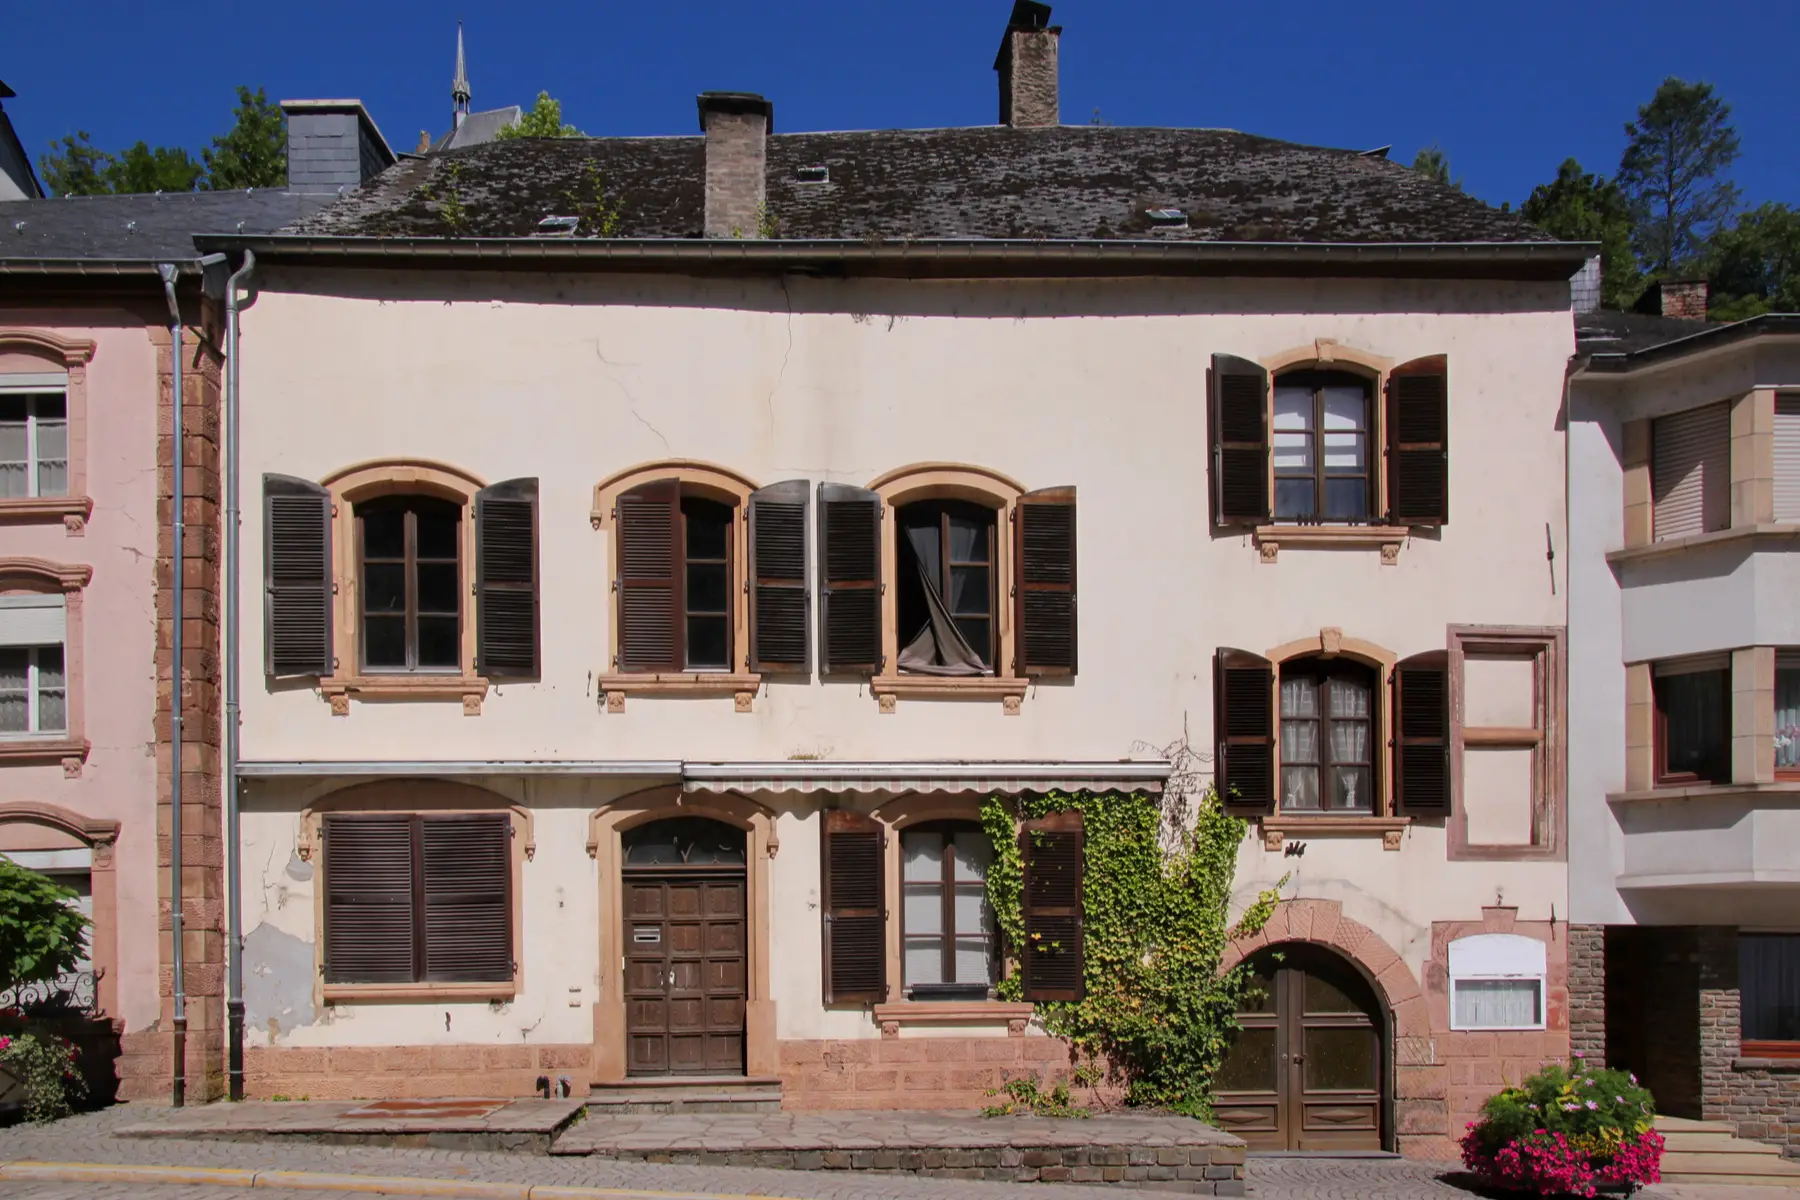 A historic house in Vianden, Luxembourg